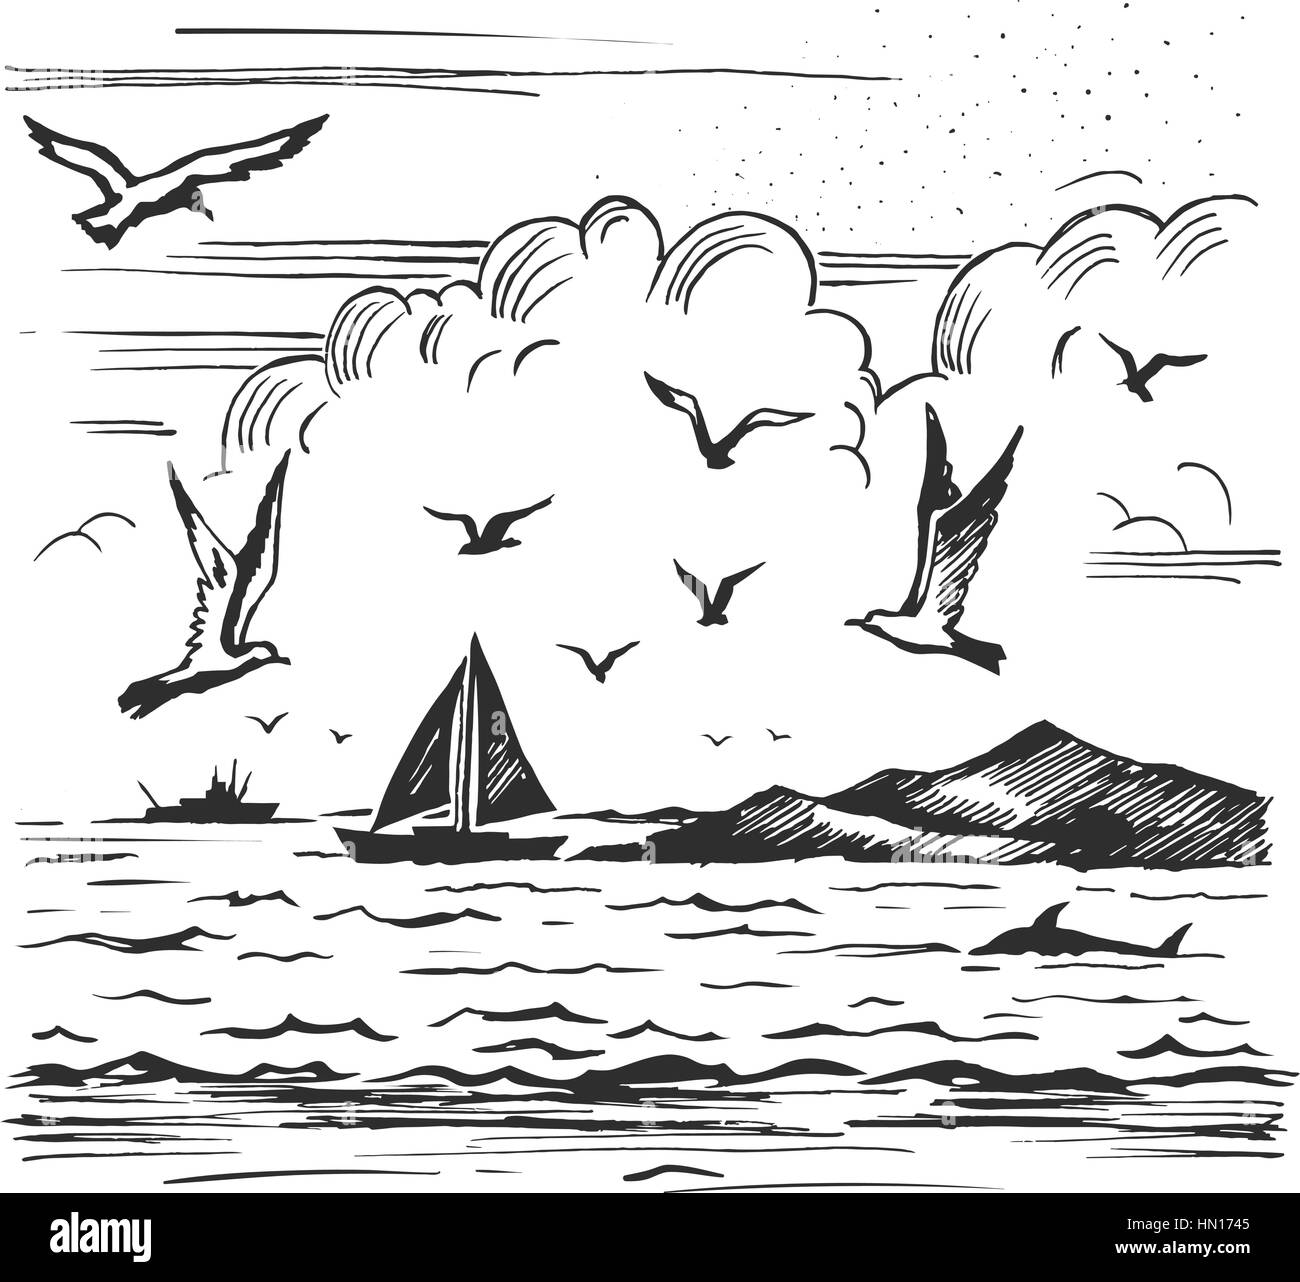 sketch seascape with yachts and seagulls Stock Vector